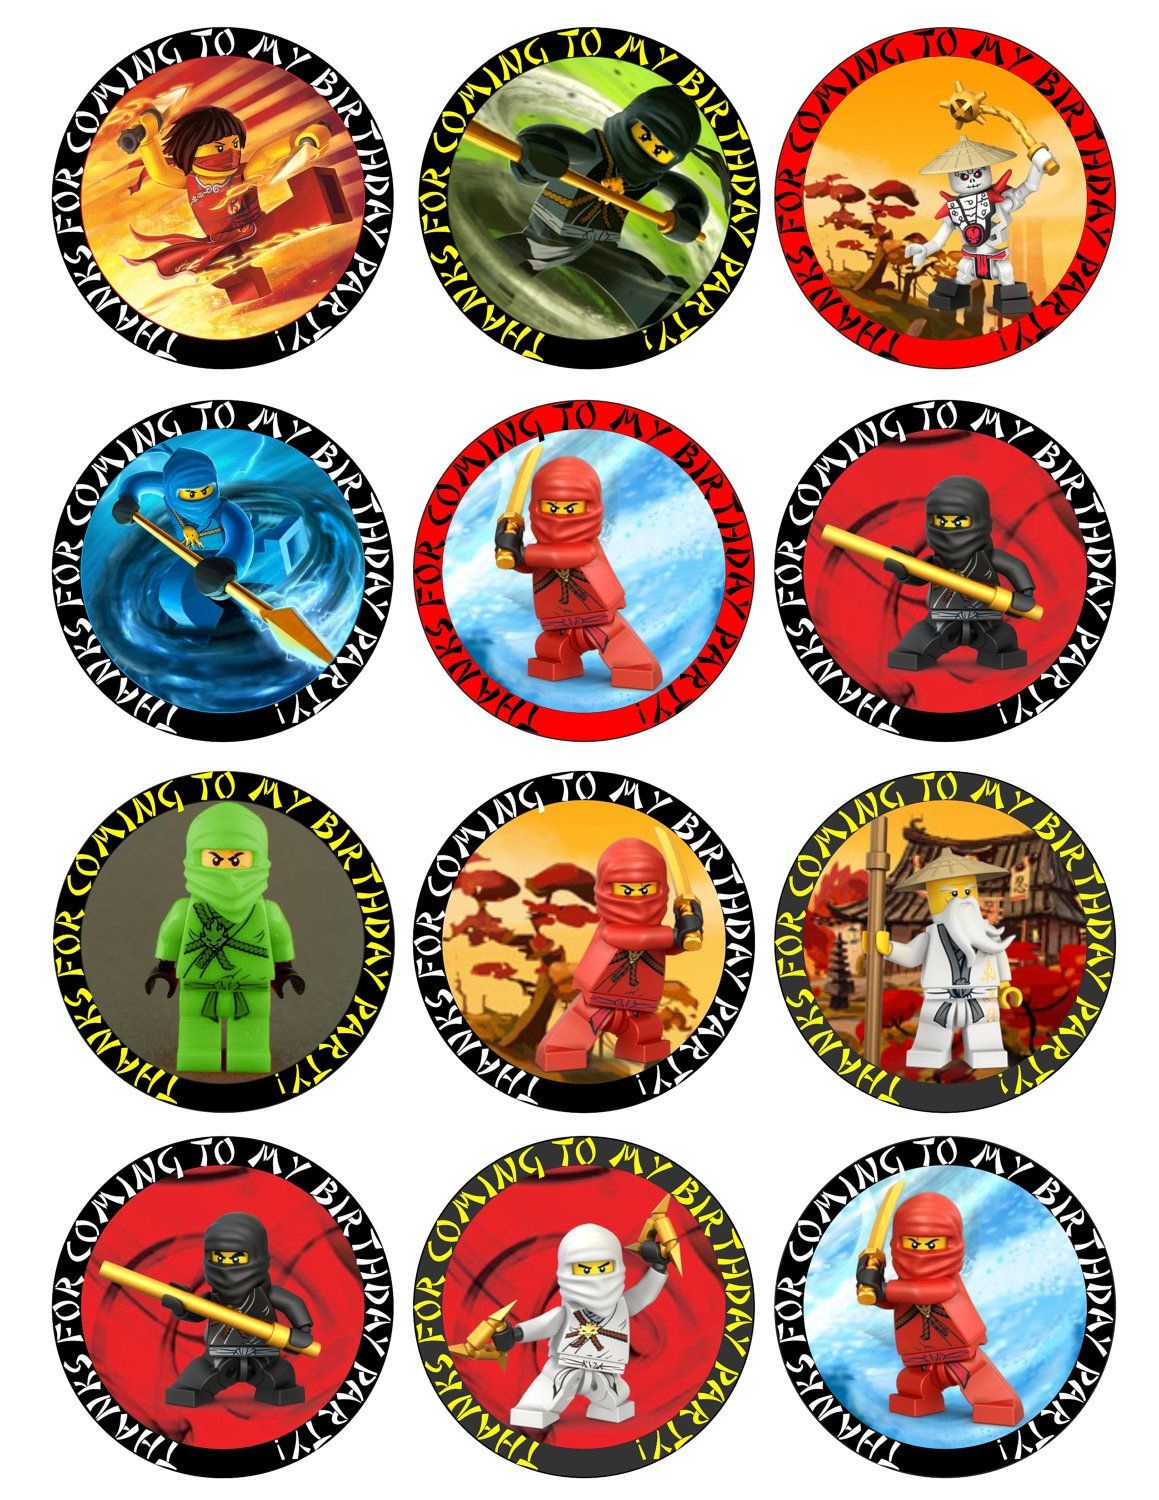 Ninjago Free Printable Toppers, Labels, Images And Invitations - Free Printable Lego Cupcake Toppers